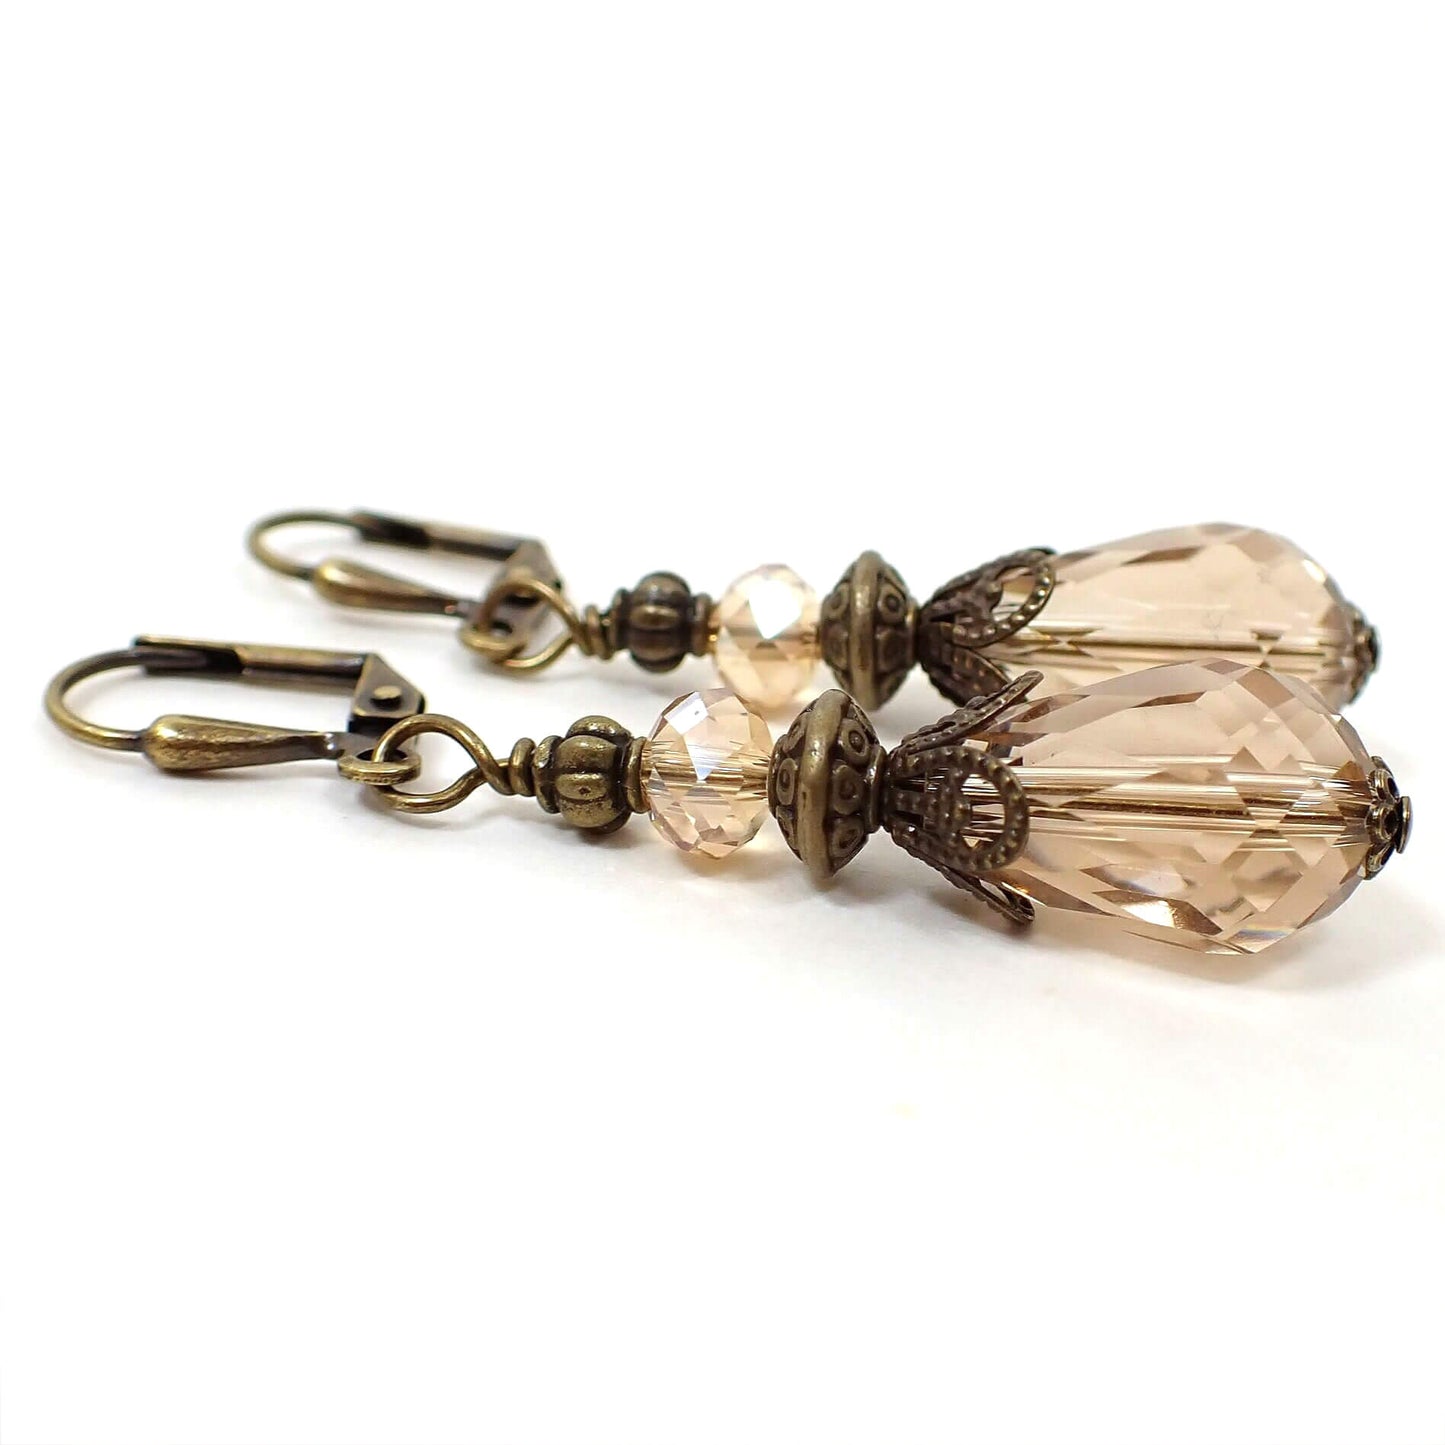 Side view of the vintage style light peach teardrop earrings. The metal is antiqued brass in color. There is a faceted glass crystal bead at the top and a faceted glass crystal teardrop bead at the bottom. 